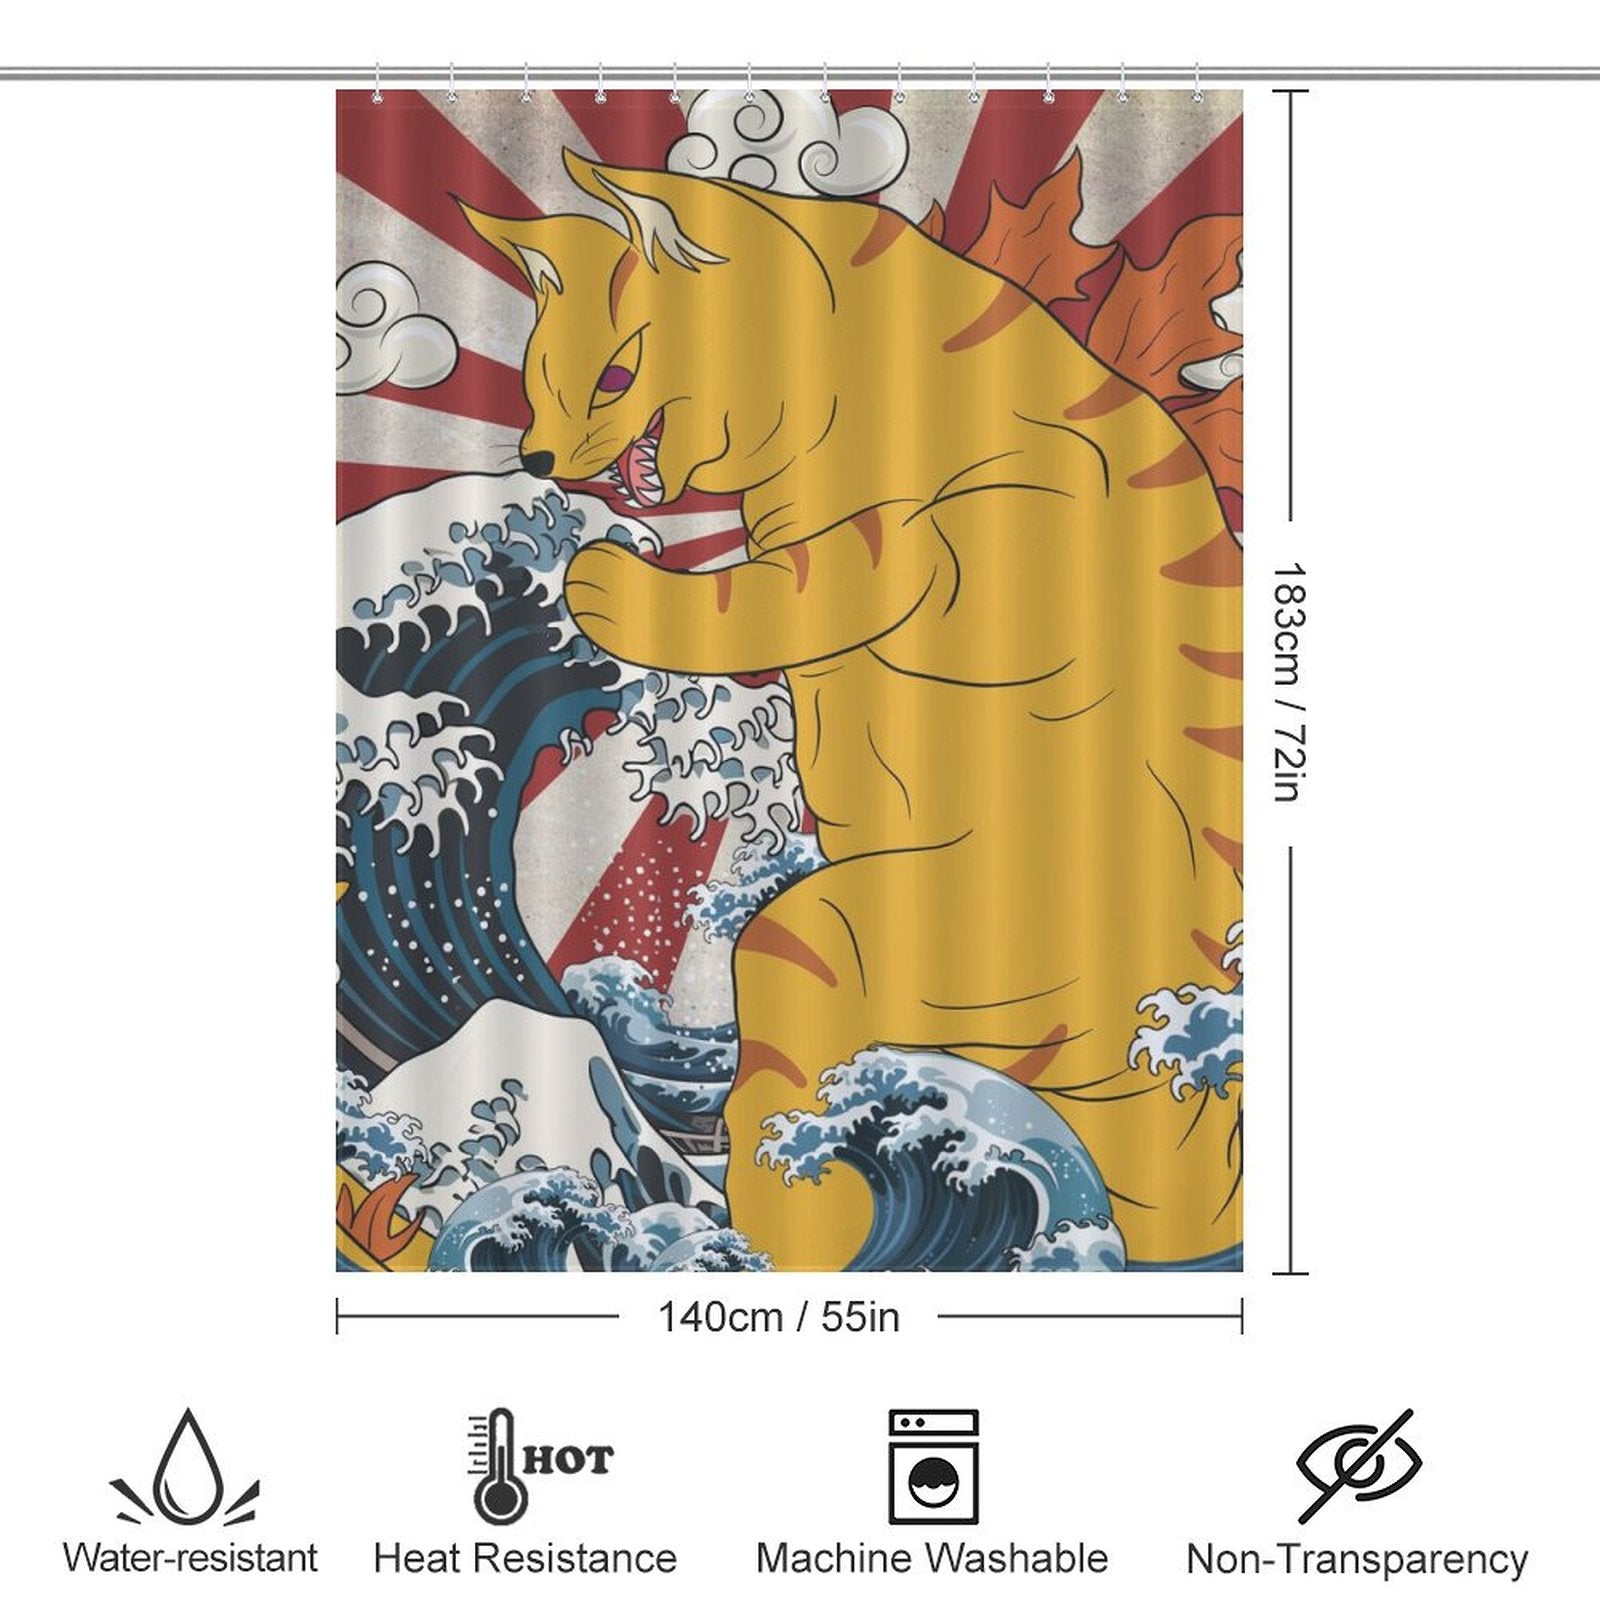 A whimsical bathroom decor piece, the Funny Wave Monster Cat Shower Curtain-Cottoncat by Cotton Cat showcases a fierce cartoon-like creature amidst crashing waves and sun rays. Measuring 183cm x 140cm (72in x 55in), it's waterproof, mildew-resistant, heat resistant, machine washable, and non-transparent.